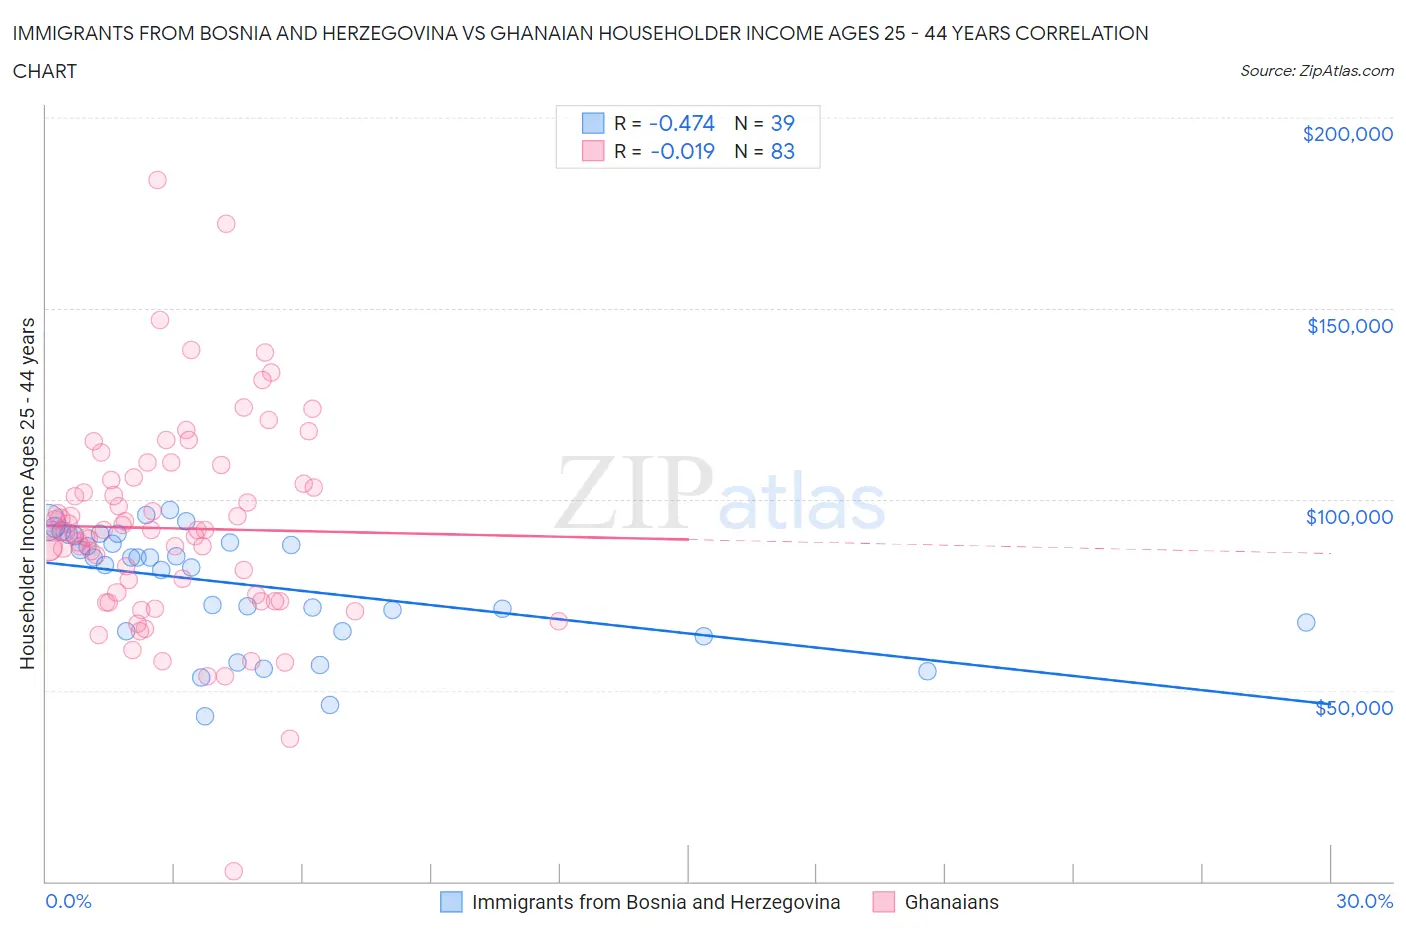 Immigrants from Bosnia and Herzegovina vs Ghanaian Householder Income Ages 25 - 44 years